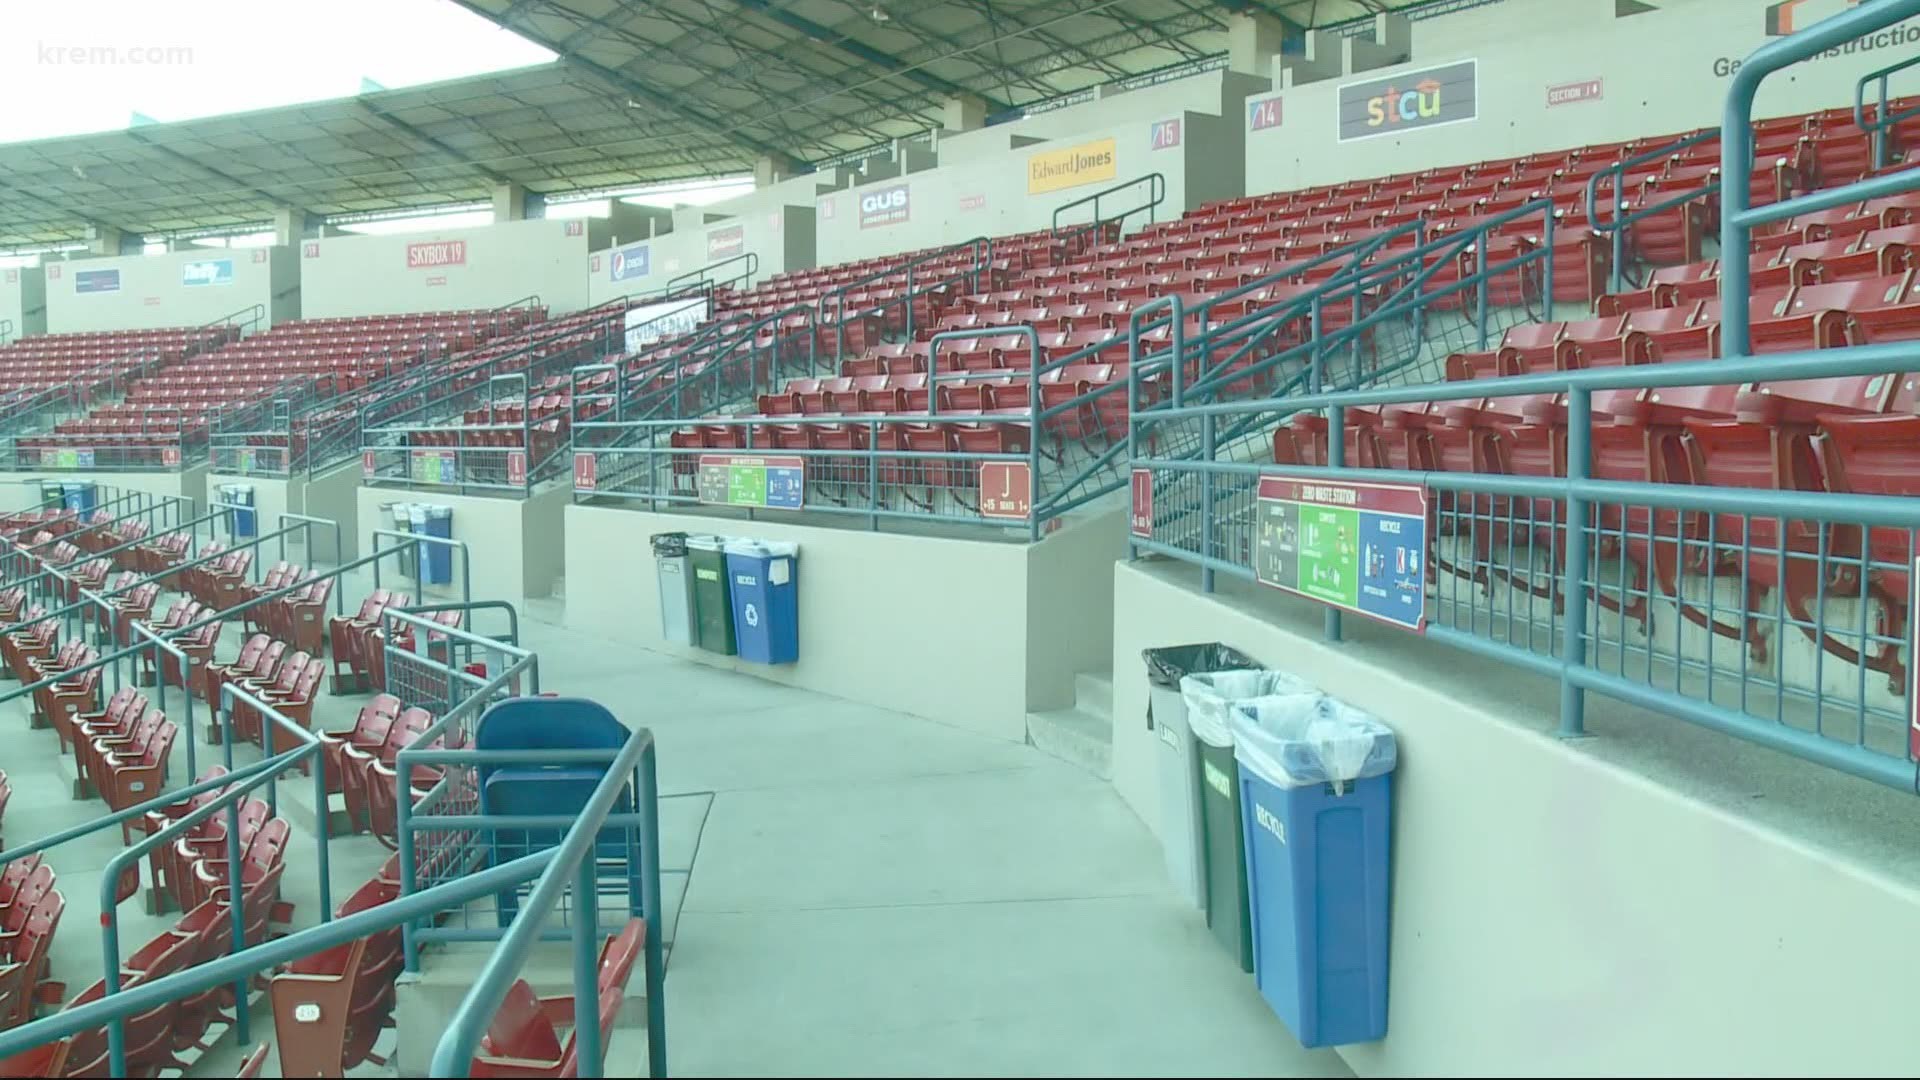 Organizers have made some changes at the stadium to make fans more comfortable, including free water, misters and more.